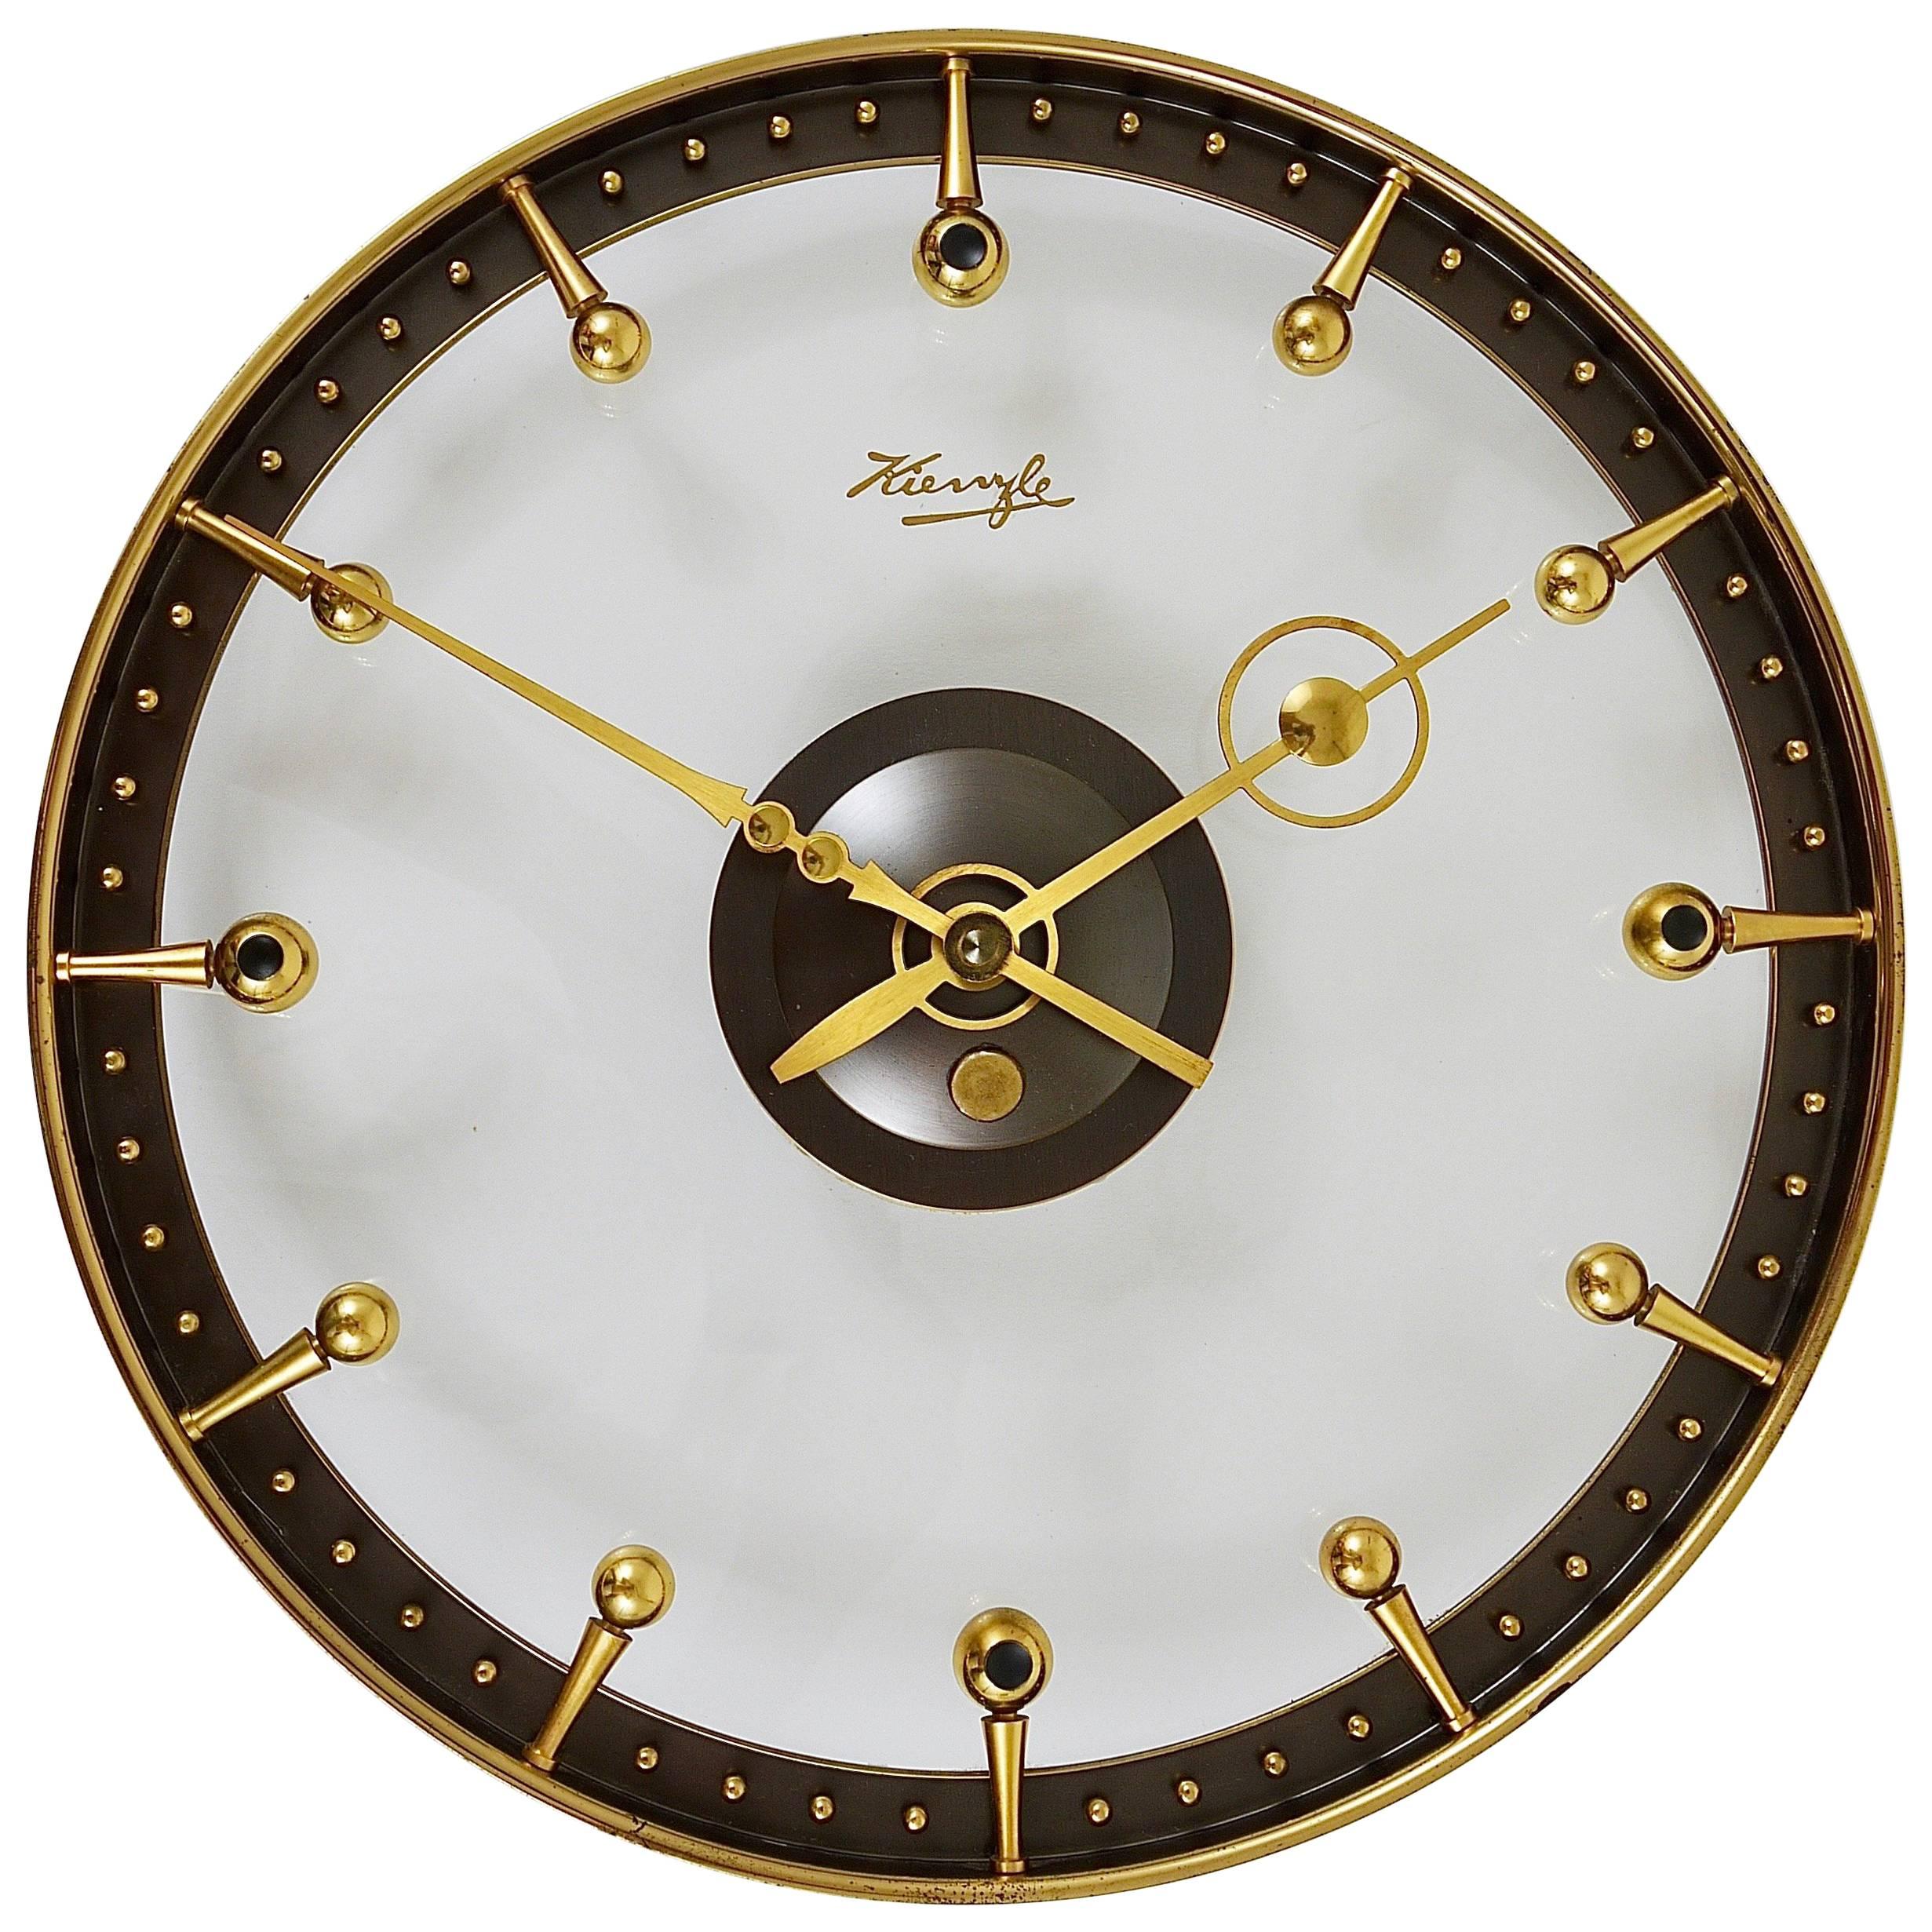 Outstanding Mid-Century Brass and Glass Wall Clock by Kienzle, Germany, 1950s